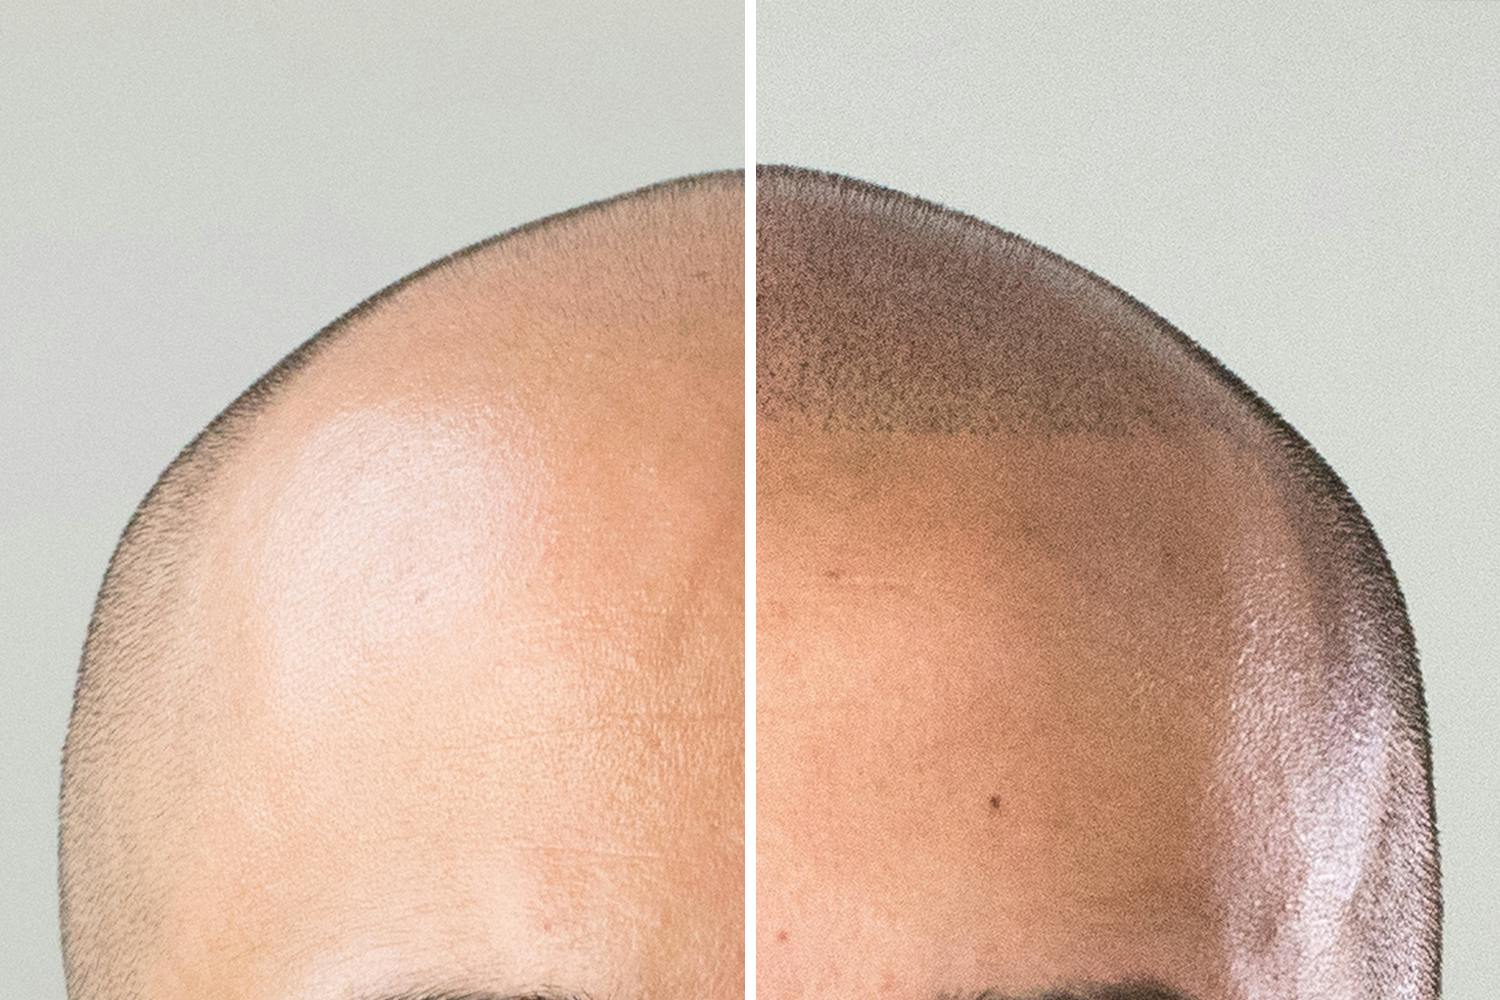 With a micropigmentation technique that stimulates hair follicles, can solve Alopecia completely pain-free